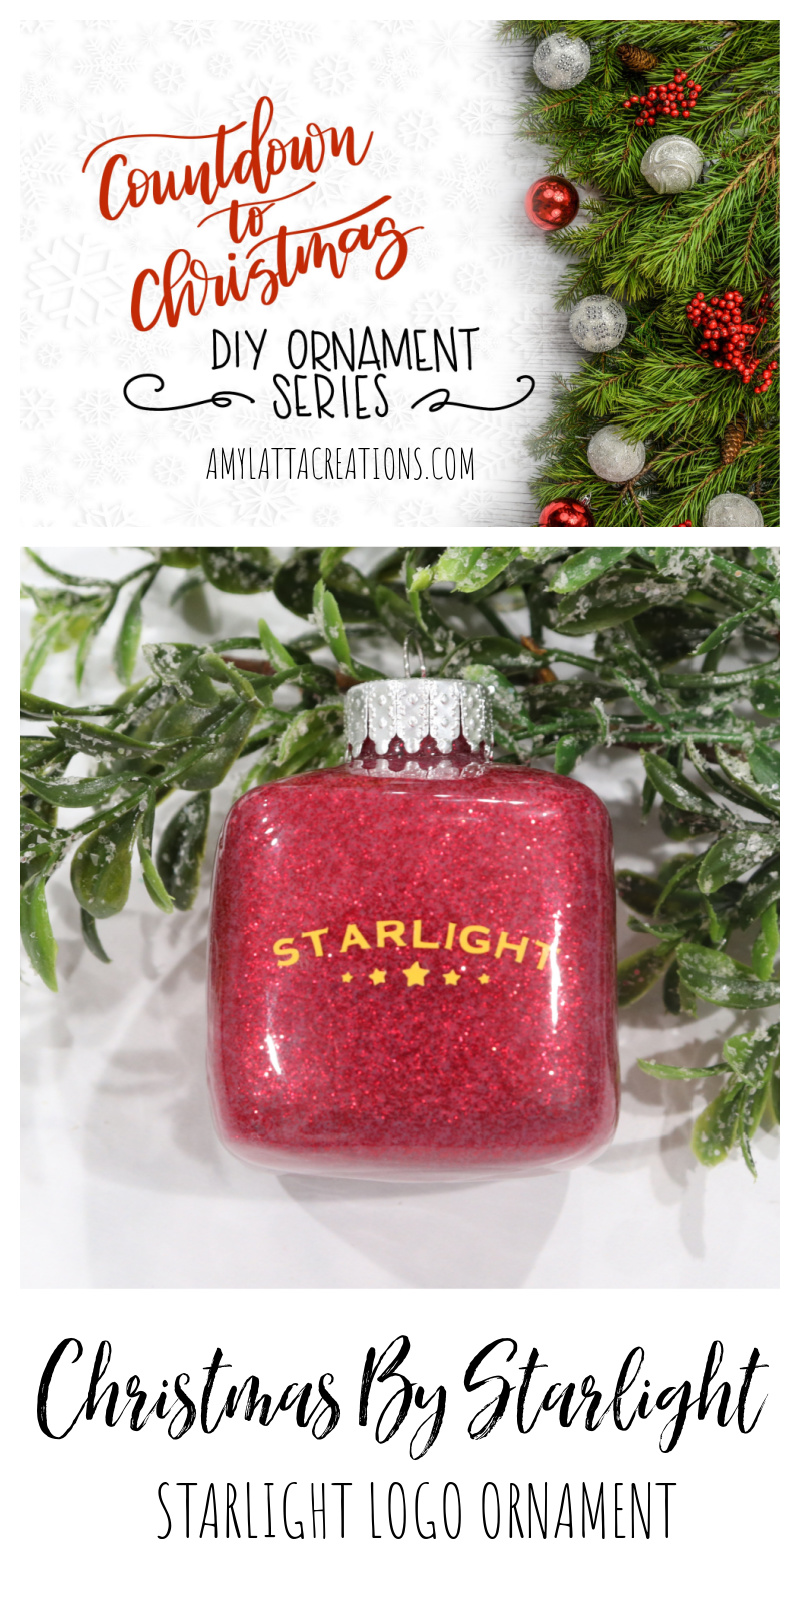 Christmas By Starlight Ornament